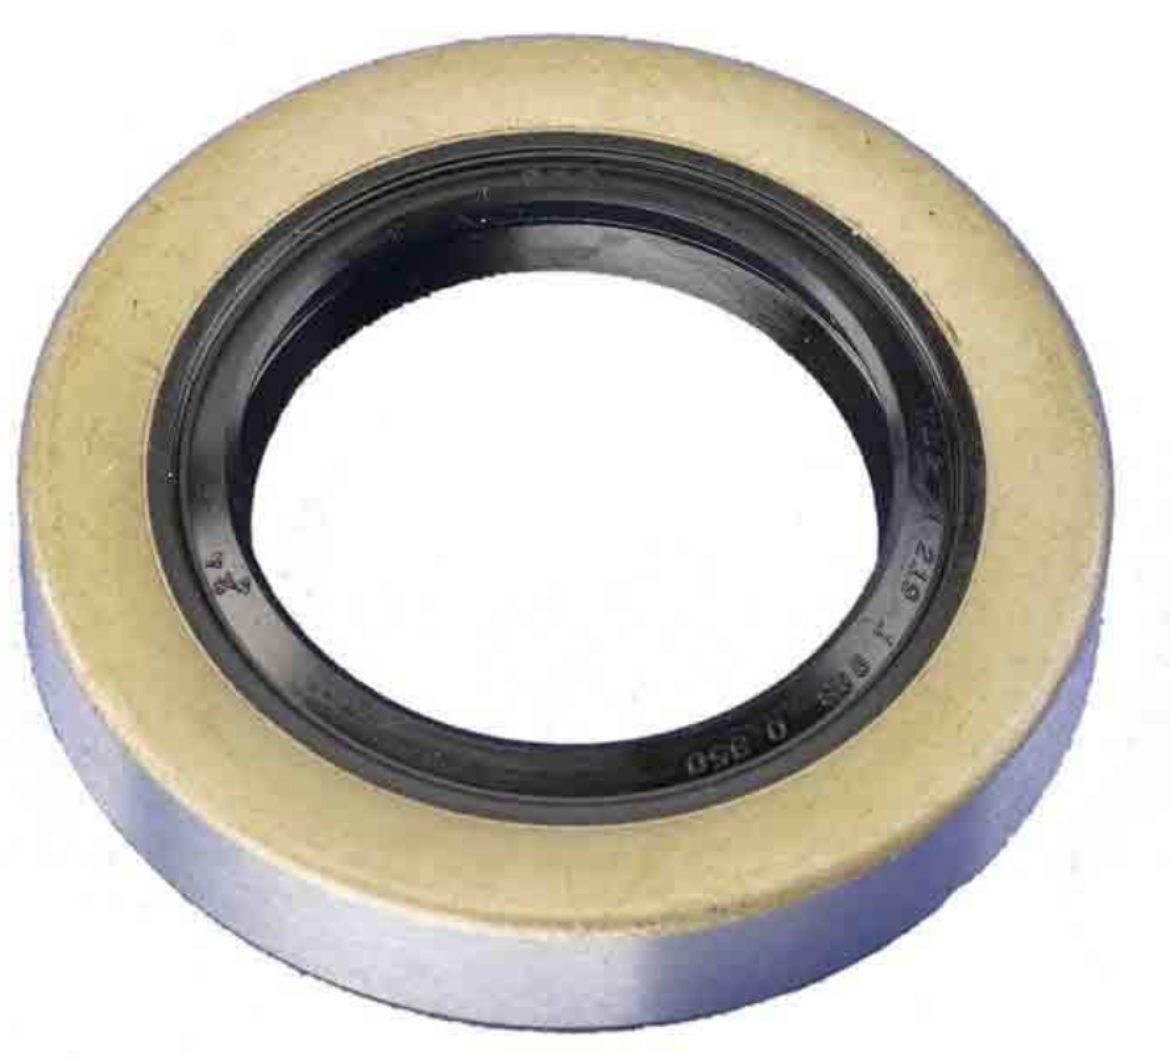 Picture of EZGO FRONT AXLE SEAL FOR 1" SPINDLE UE0427-EO E